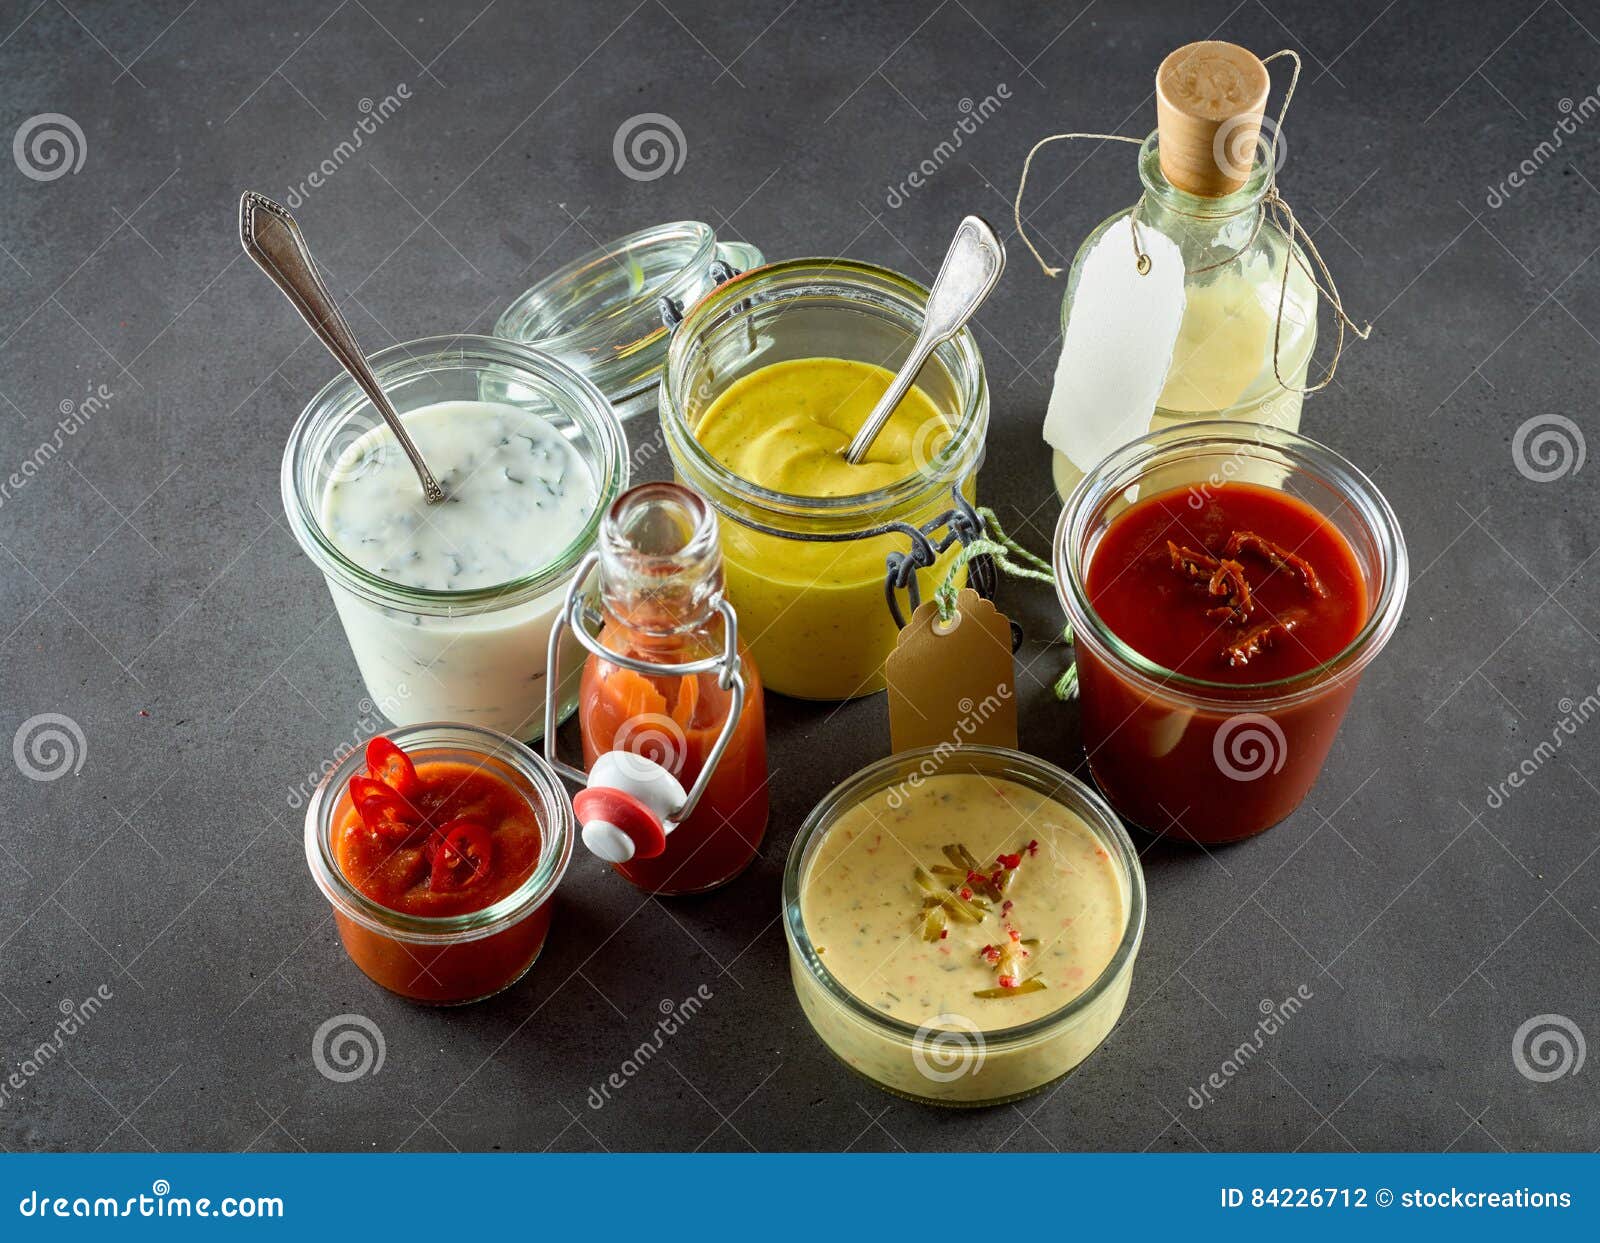 assortment of dressings, sauces and condiments